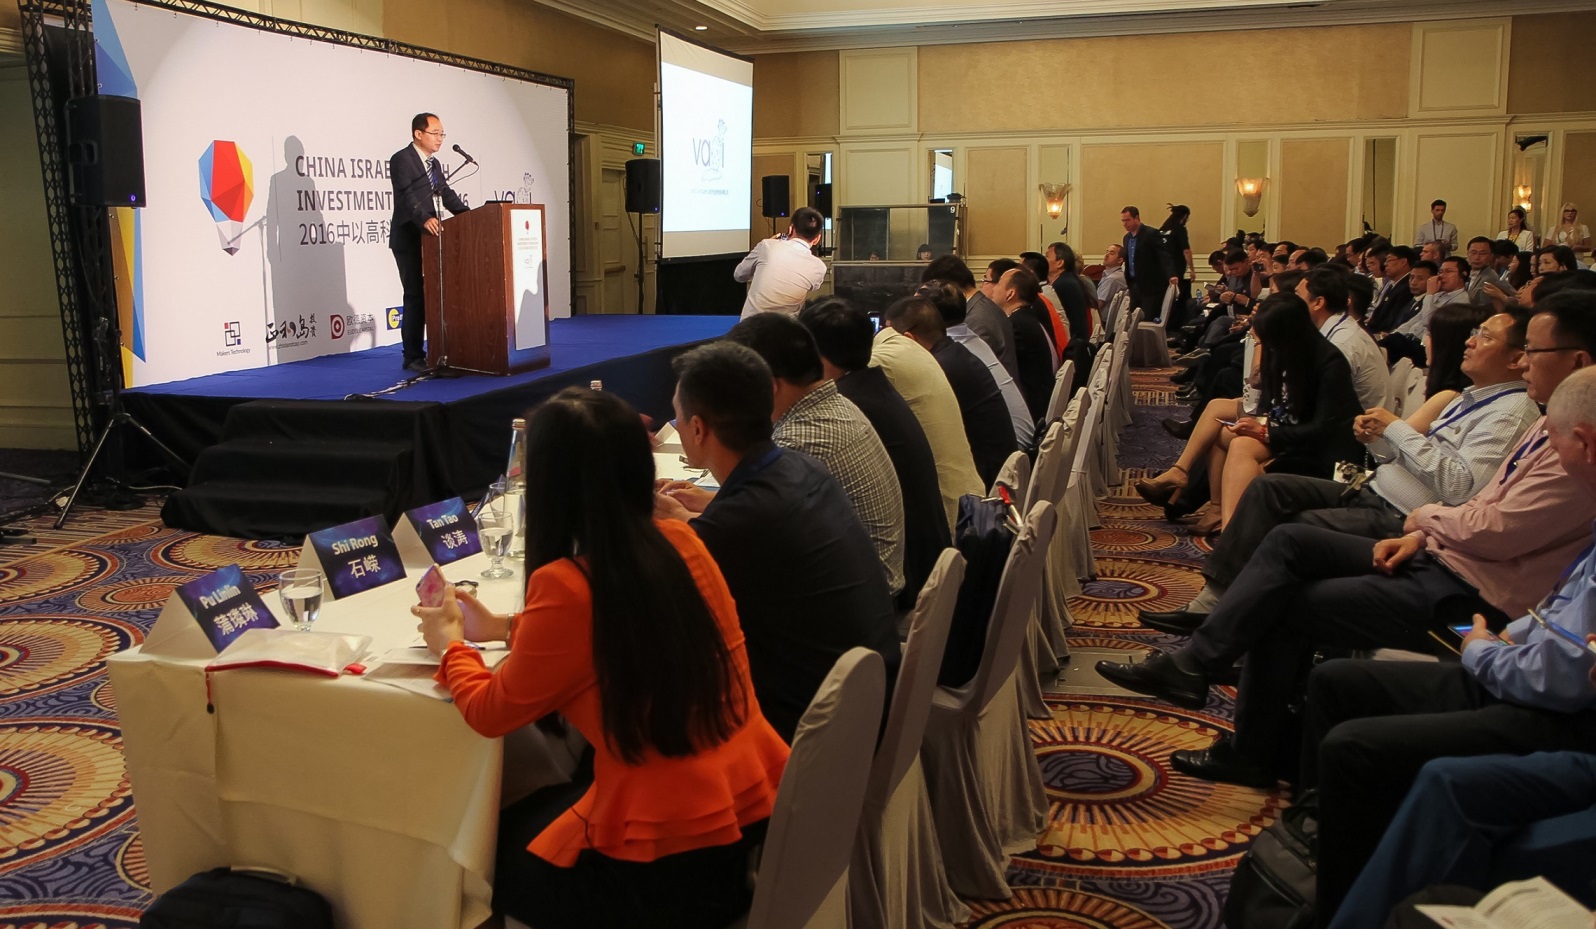 More than 100 people came to the first China-Israel Hi-tech Investments Forum. Photo: courtesy